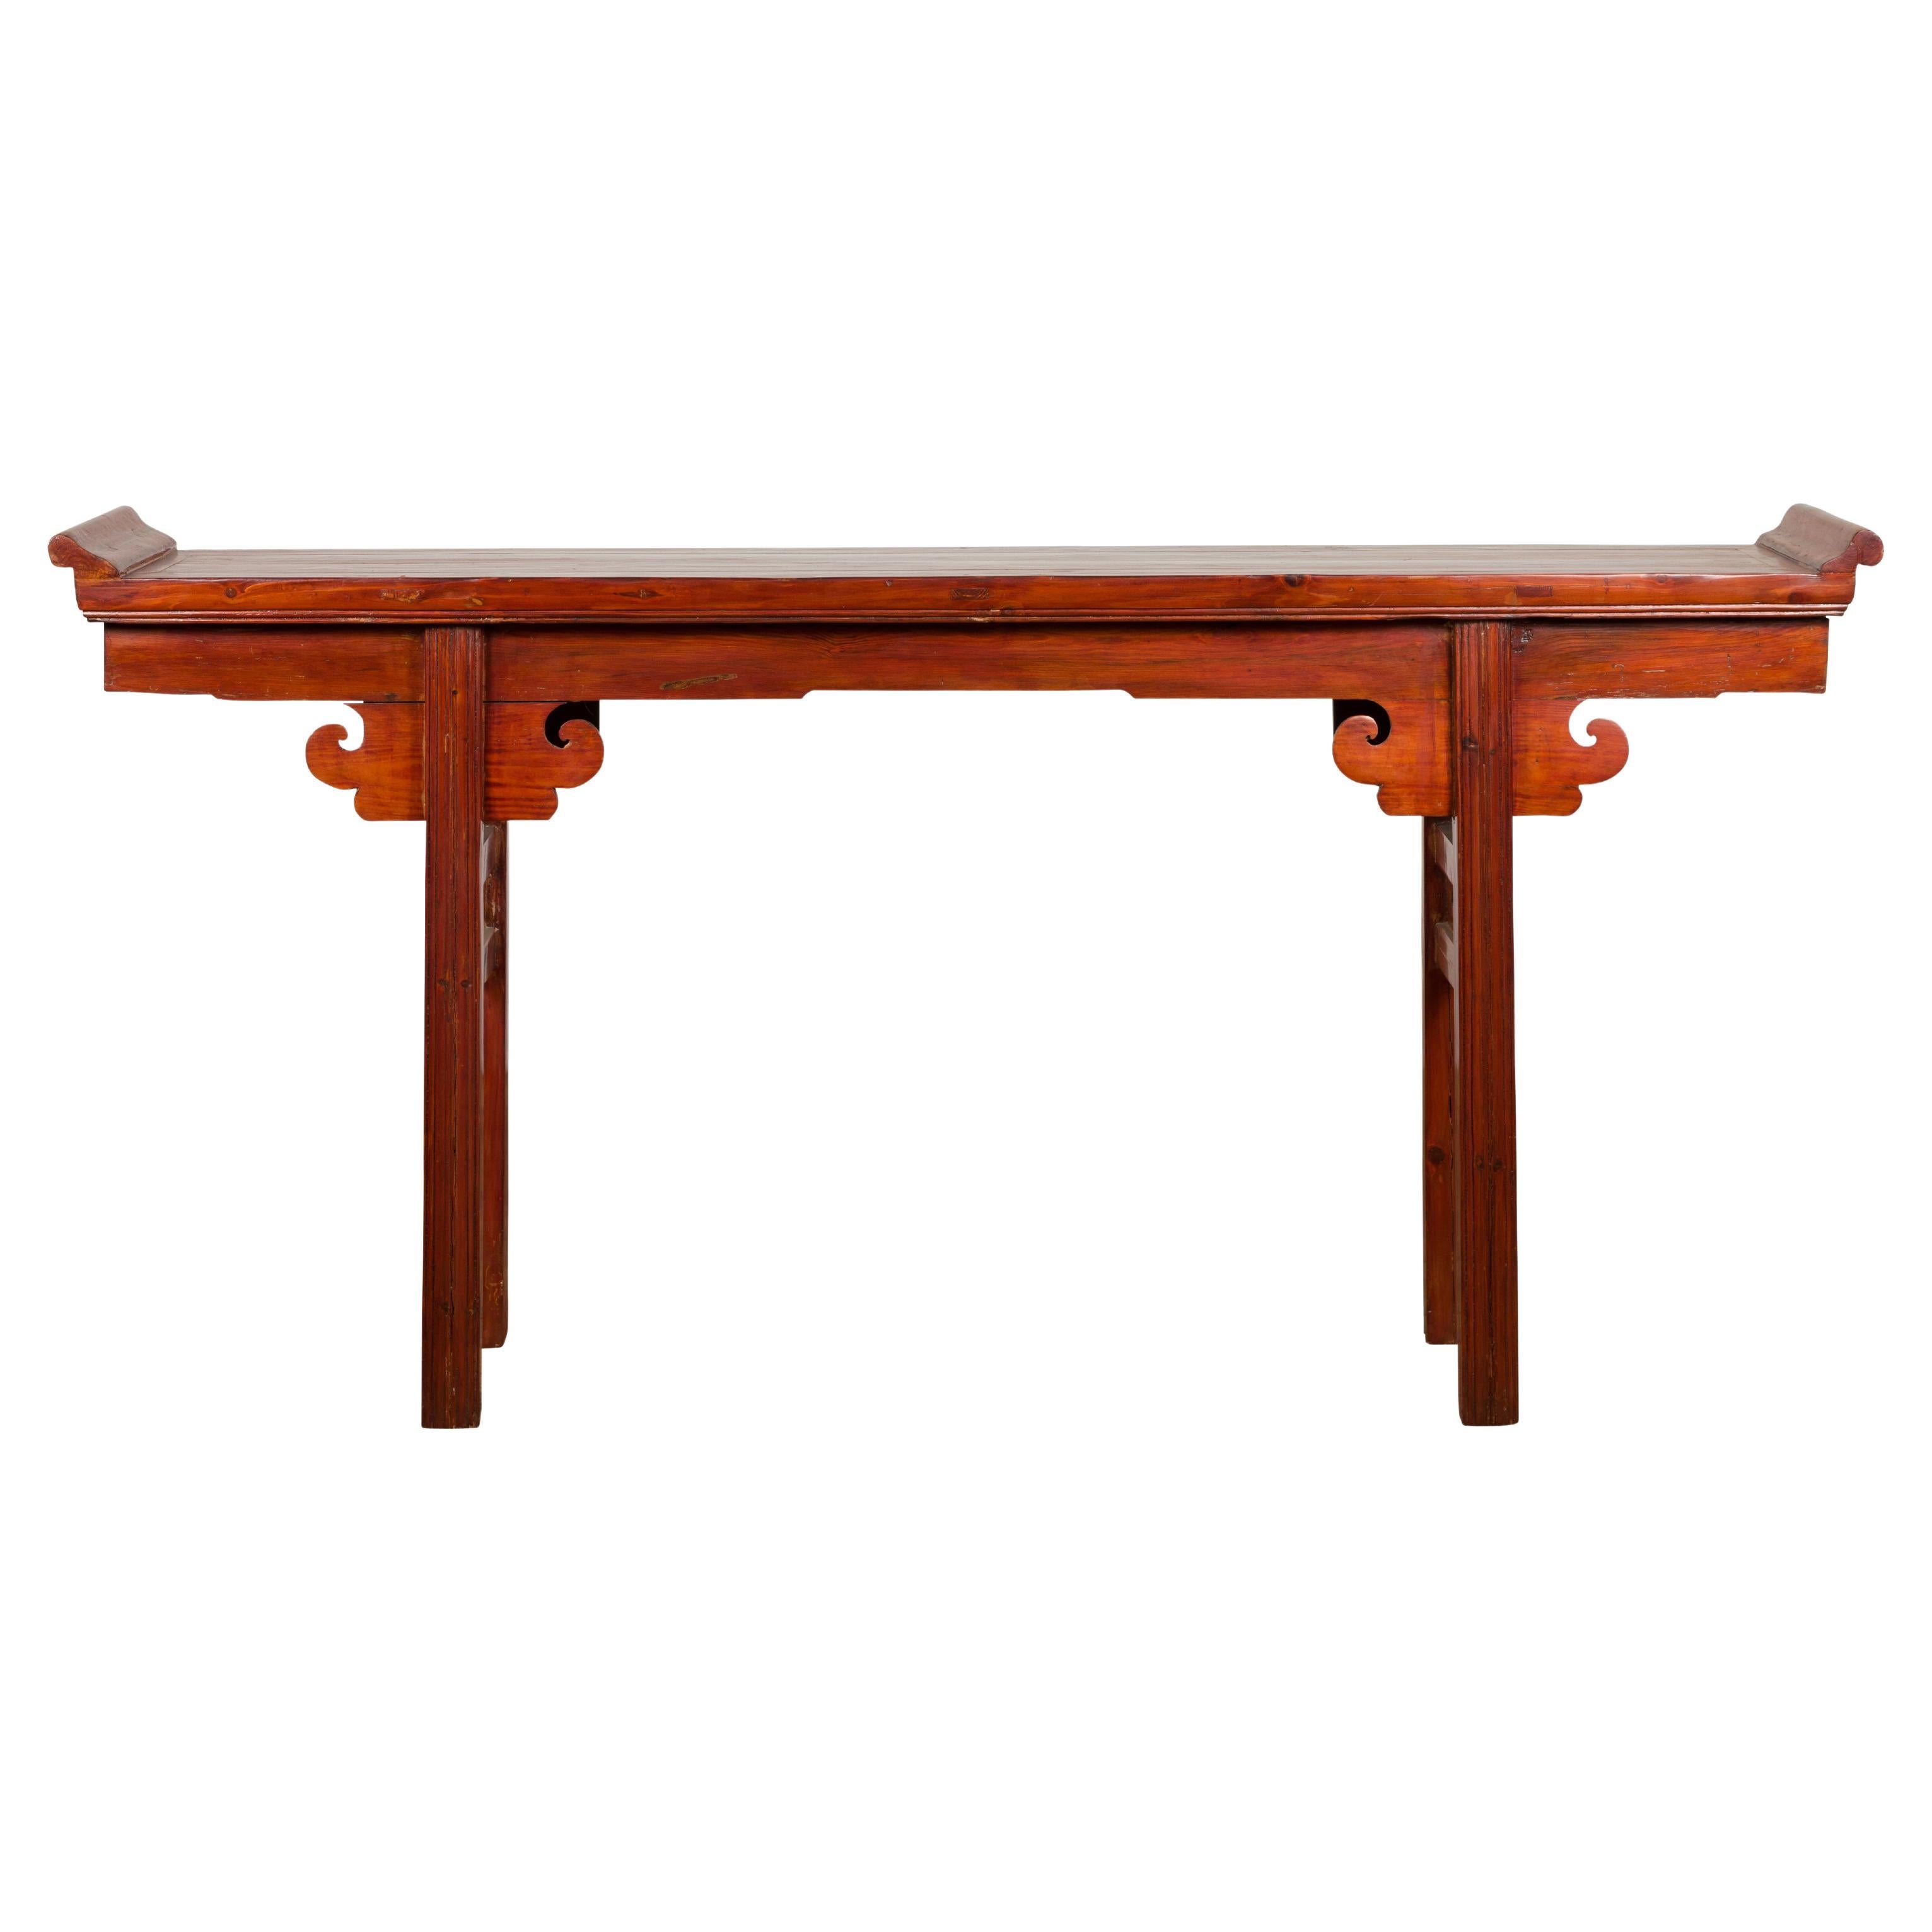 Qing Dynasty Altar Console Table with A Scrolled Wood Apron For Sale